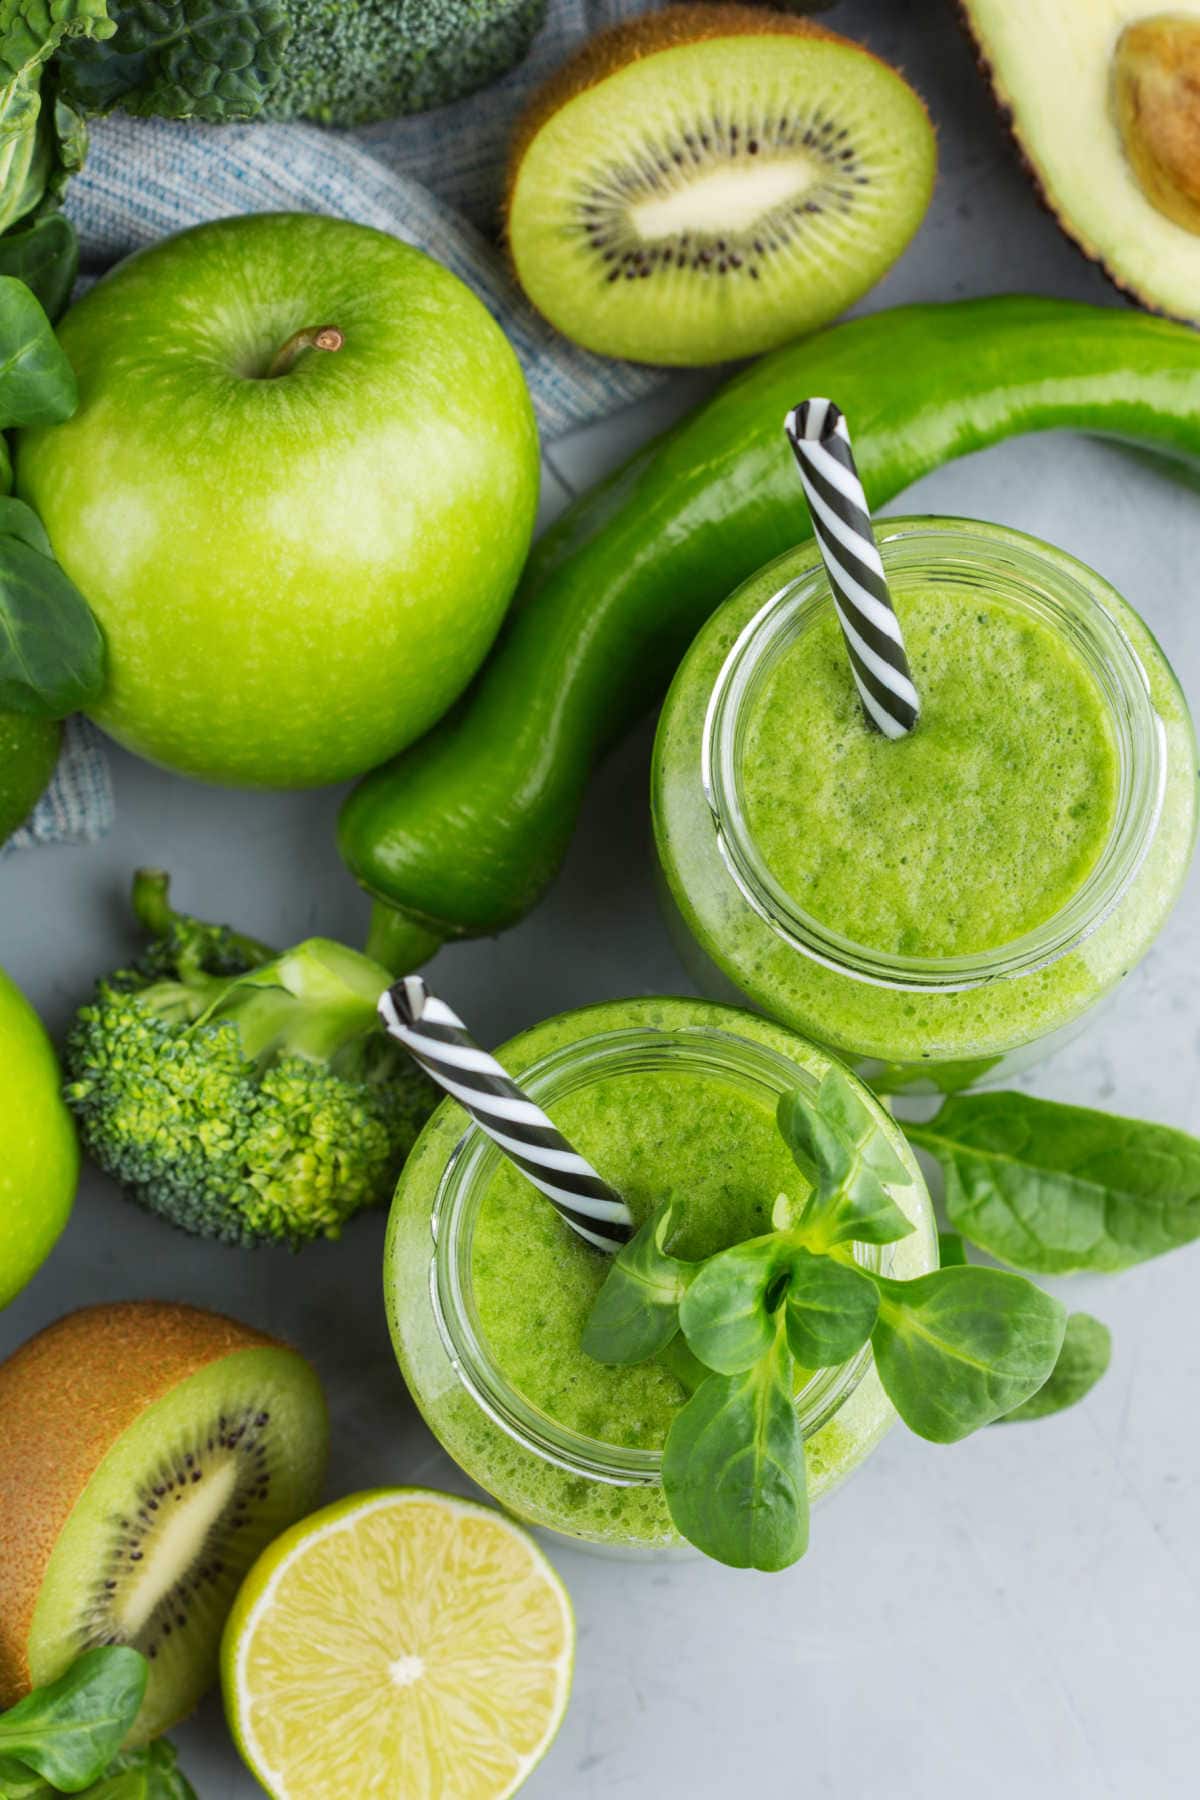 Green Fruit Names: Top Fruits That Are Both Healthy and Delicious